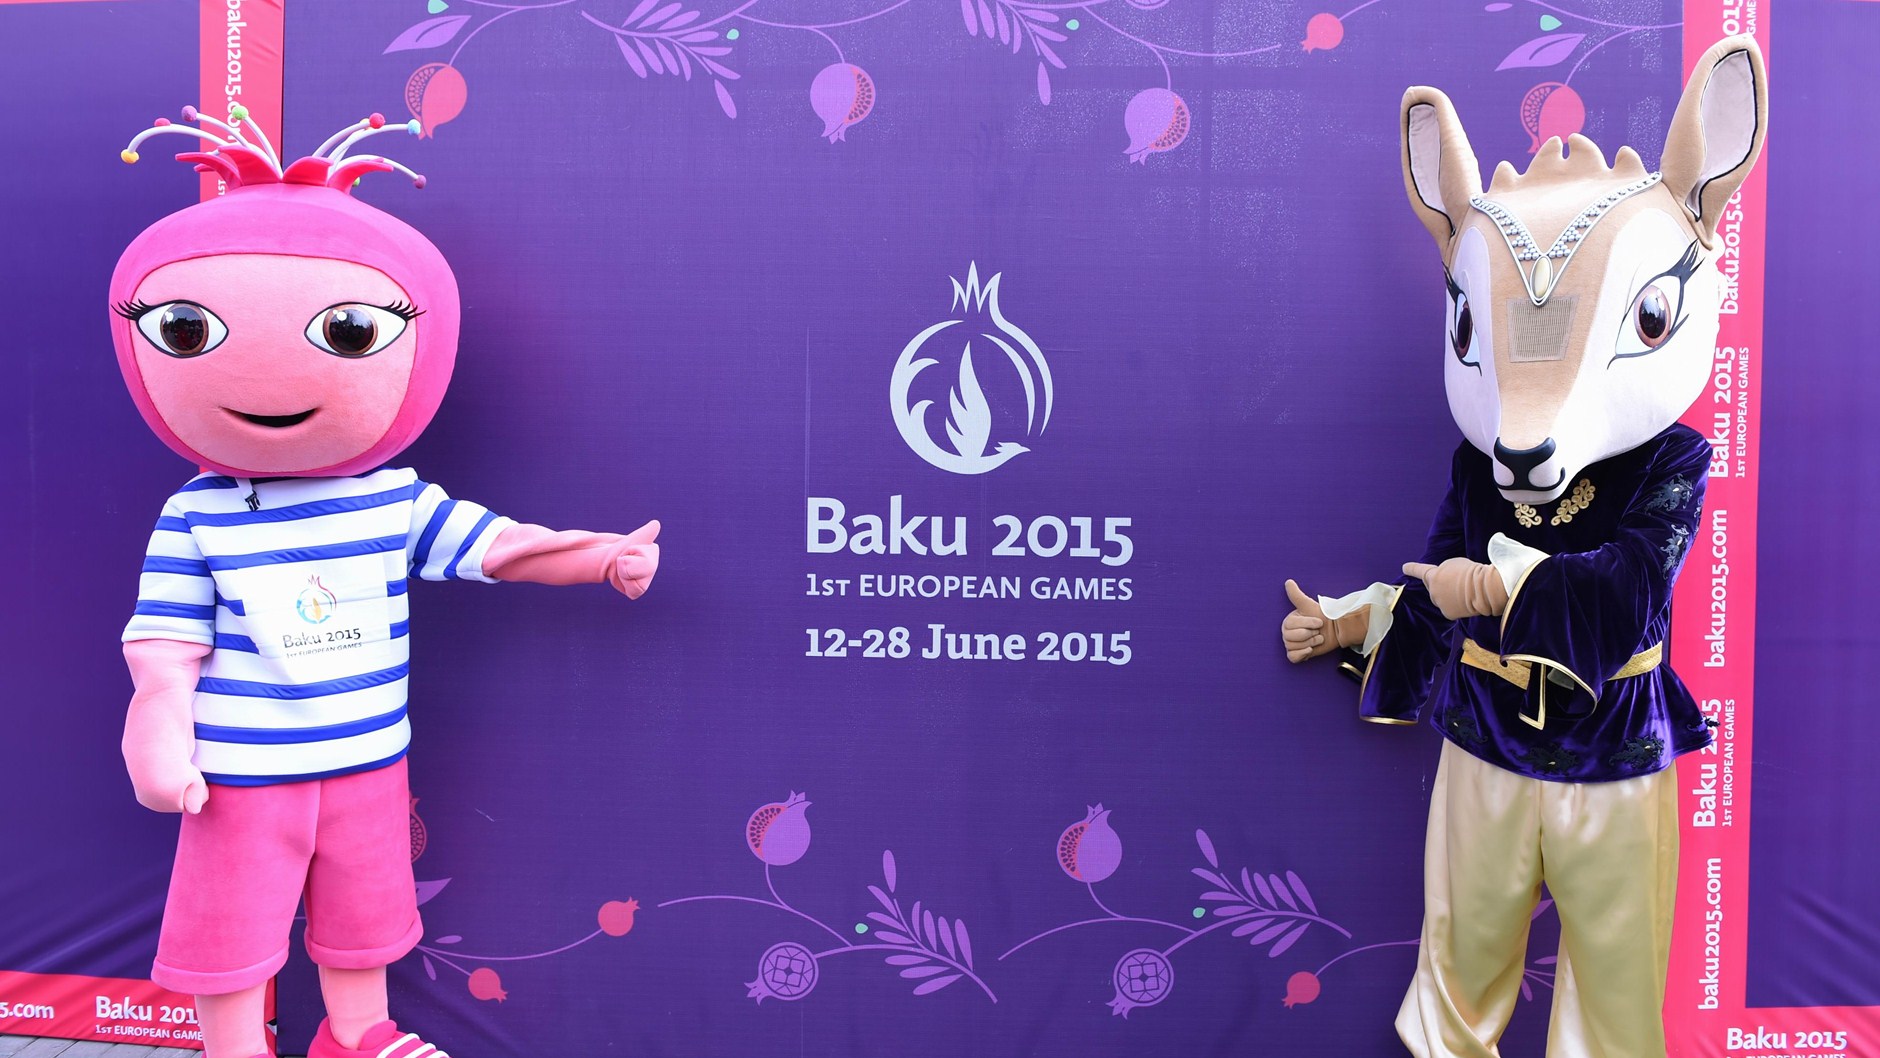 Baku 2015 have launched a Spectator Information Centre ahead of the inaugural European Games ©Baku 2015